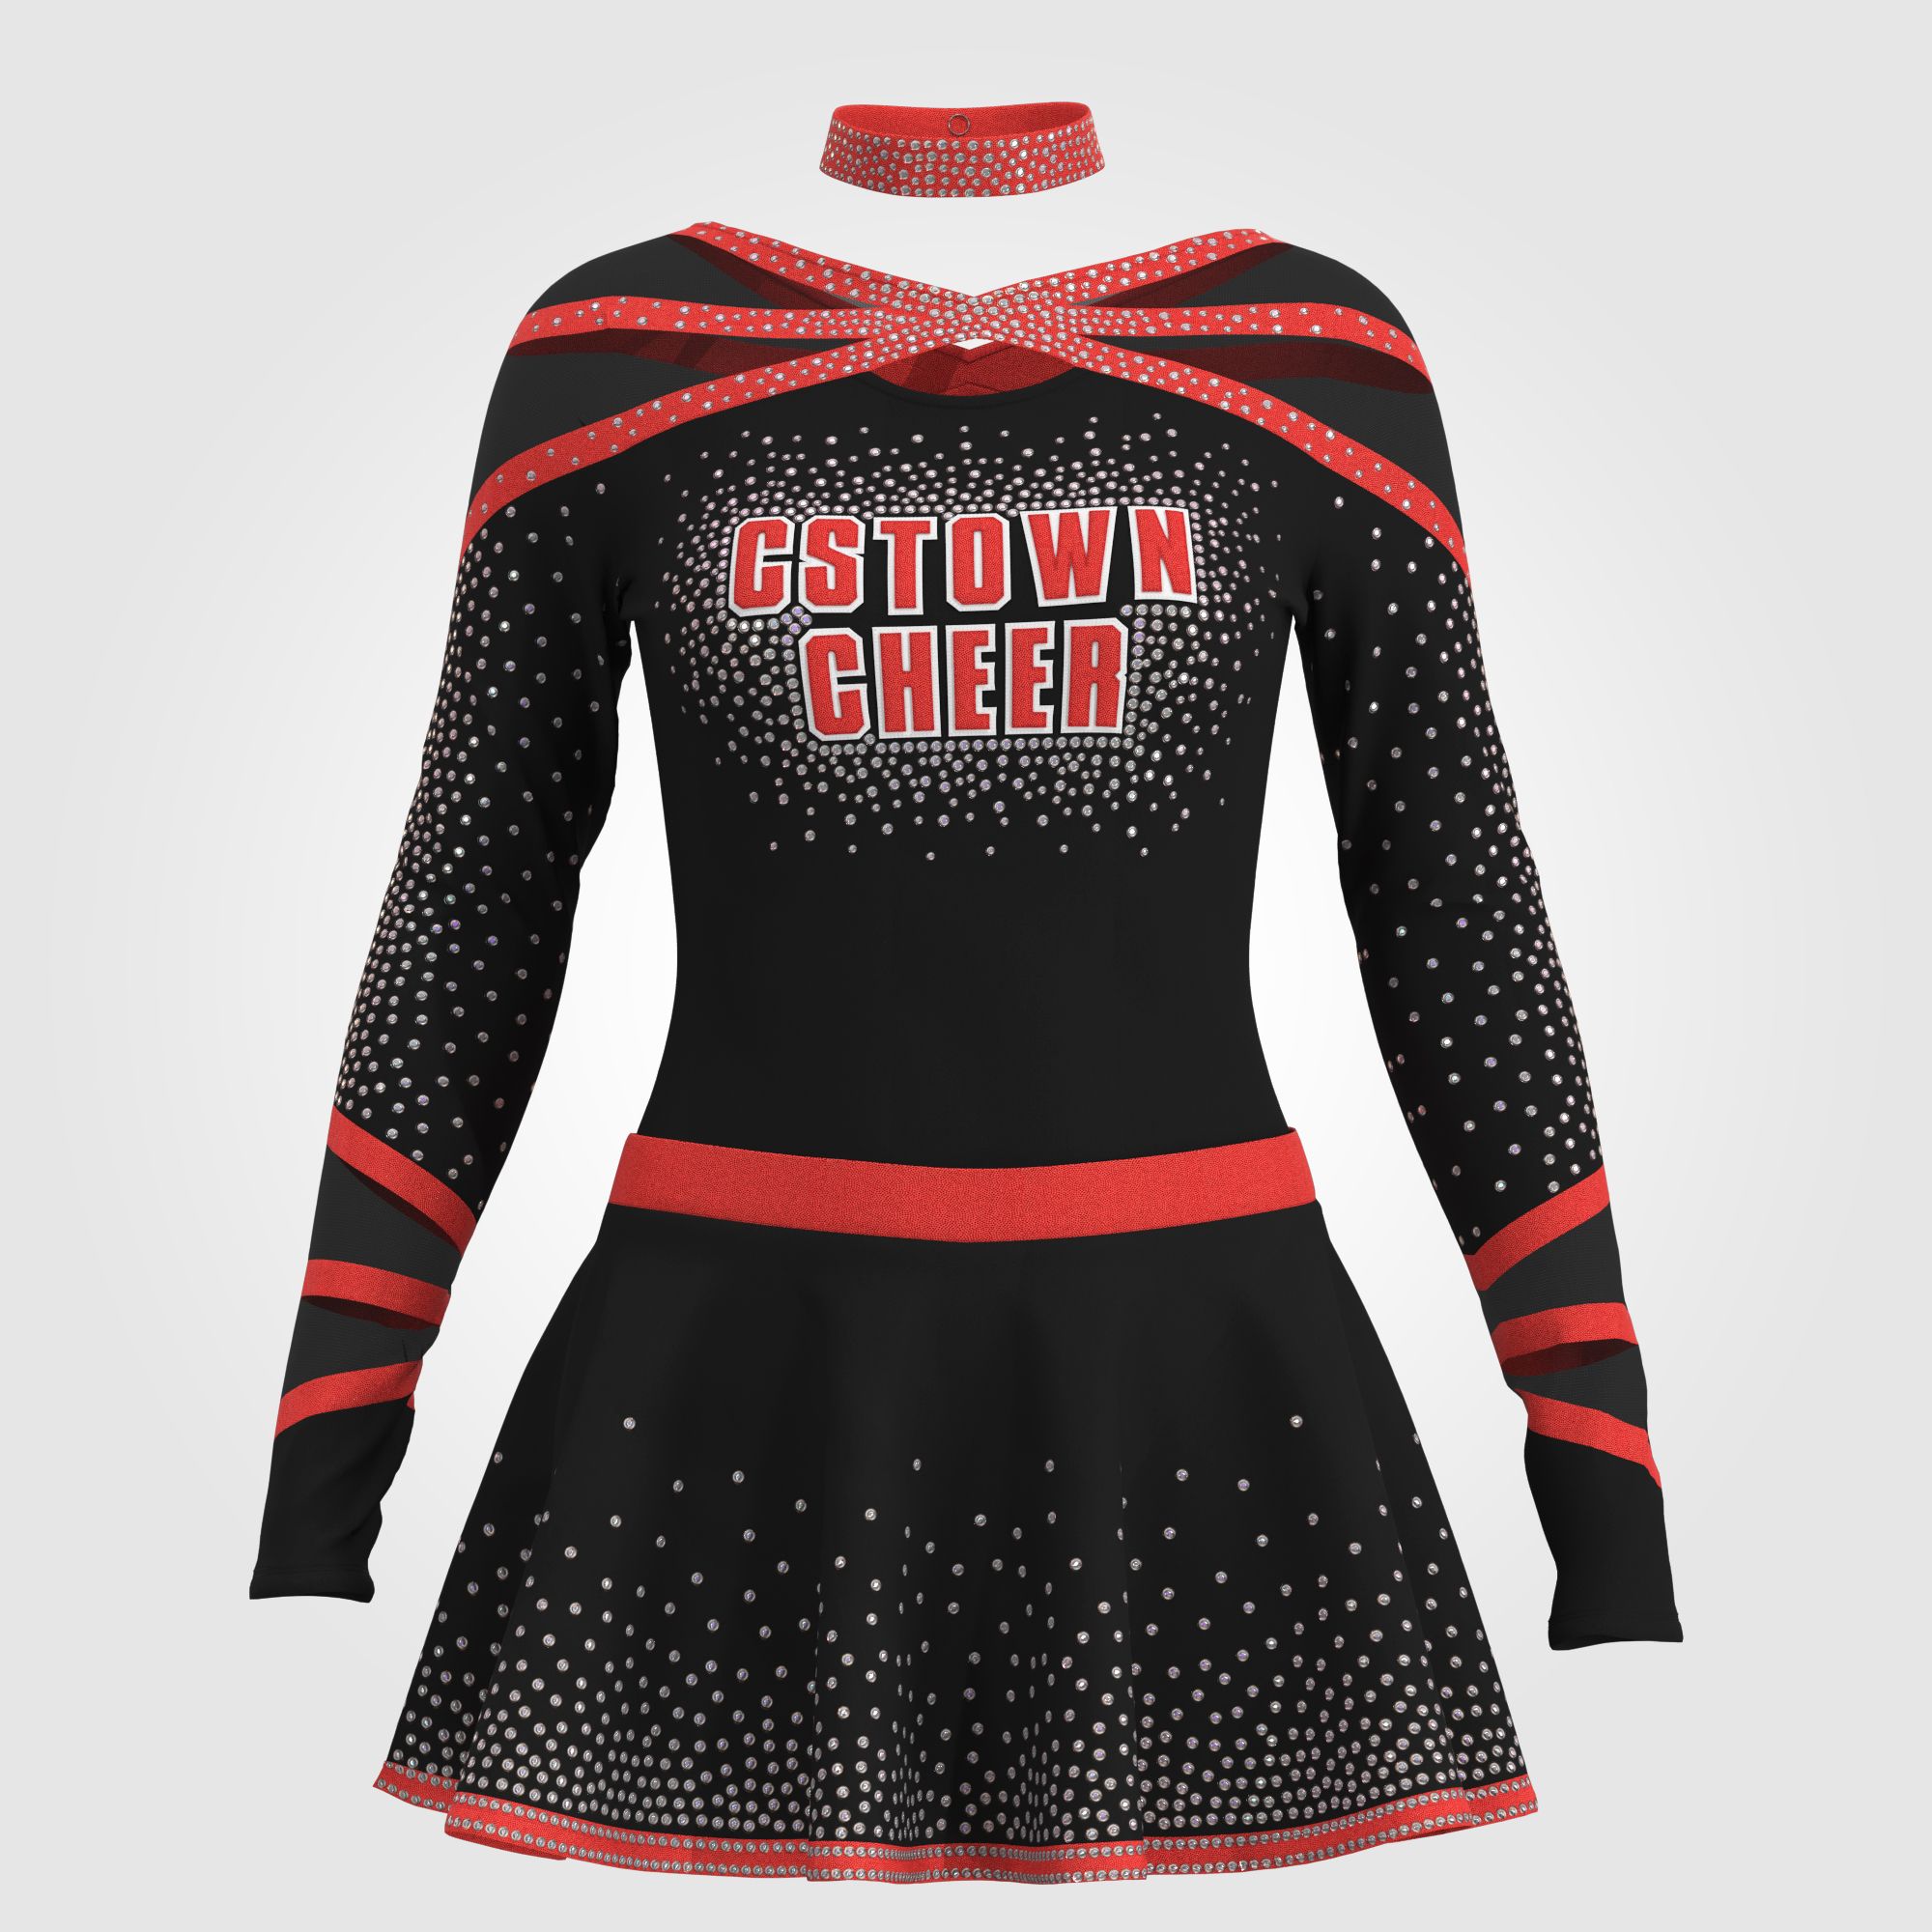 wholesale black and red cheer uniforms